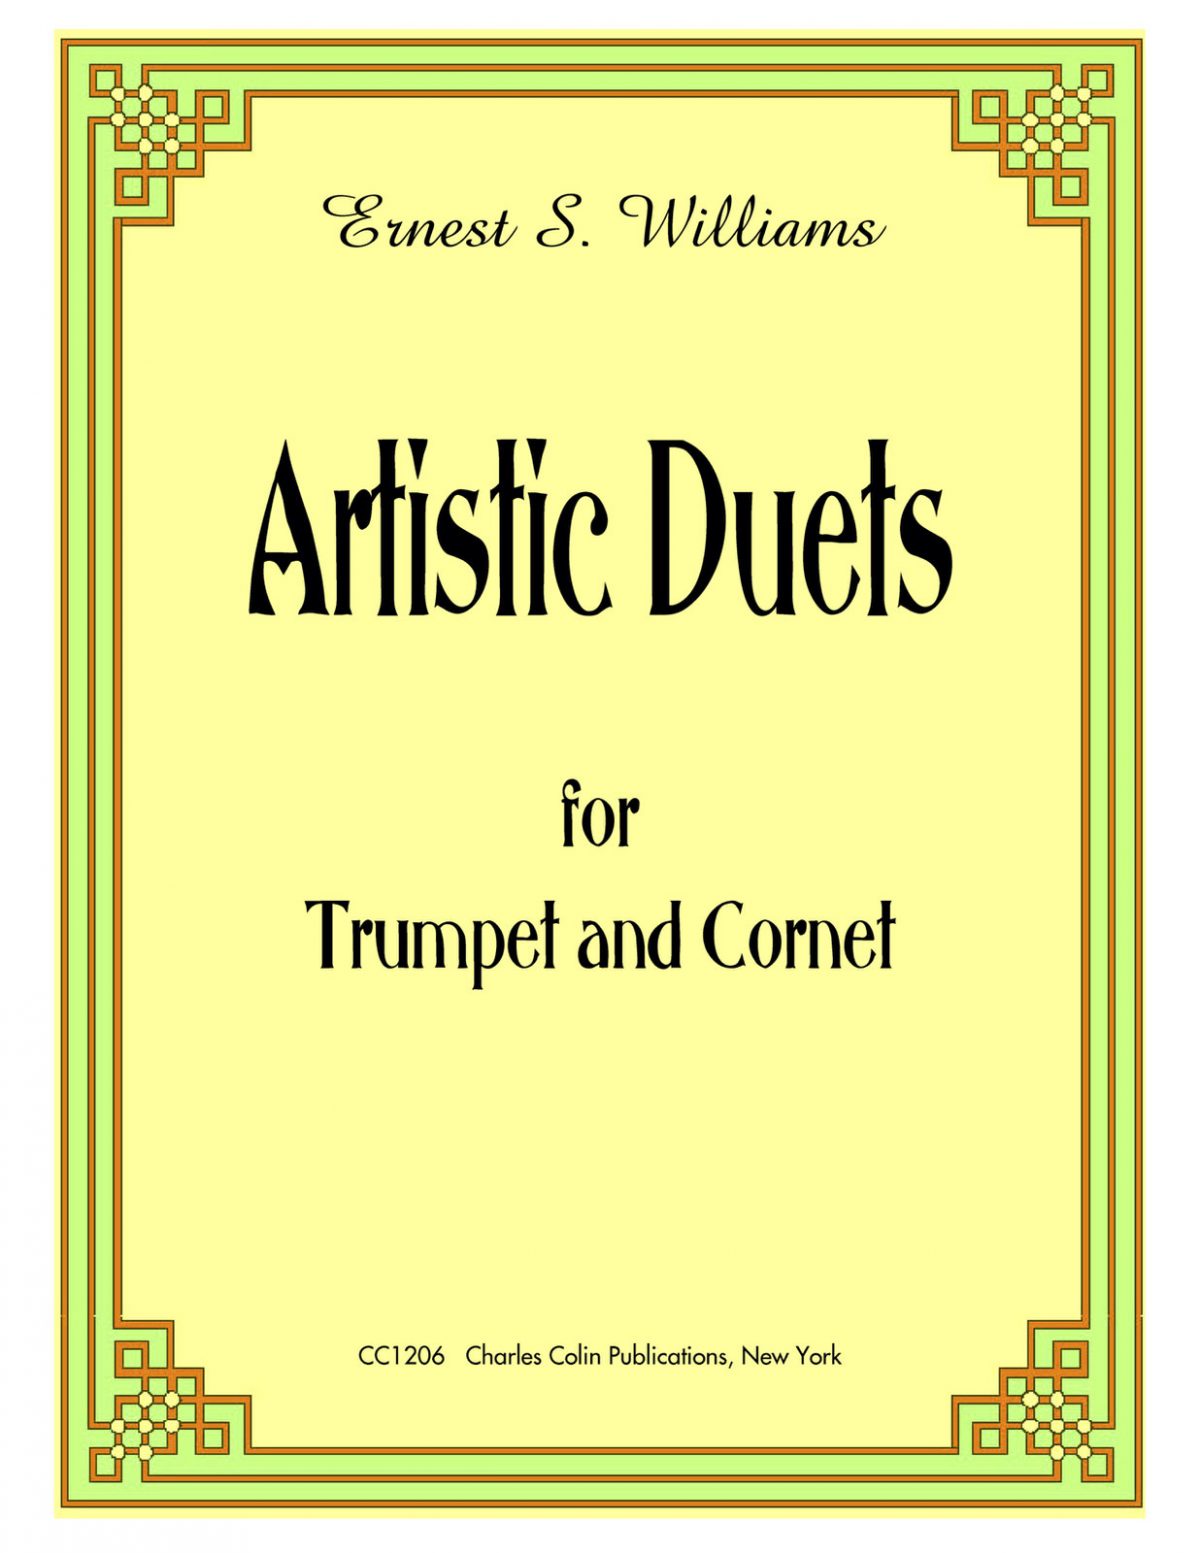 Artistic Duets for Trumpet and Cornet